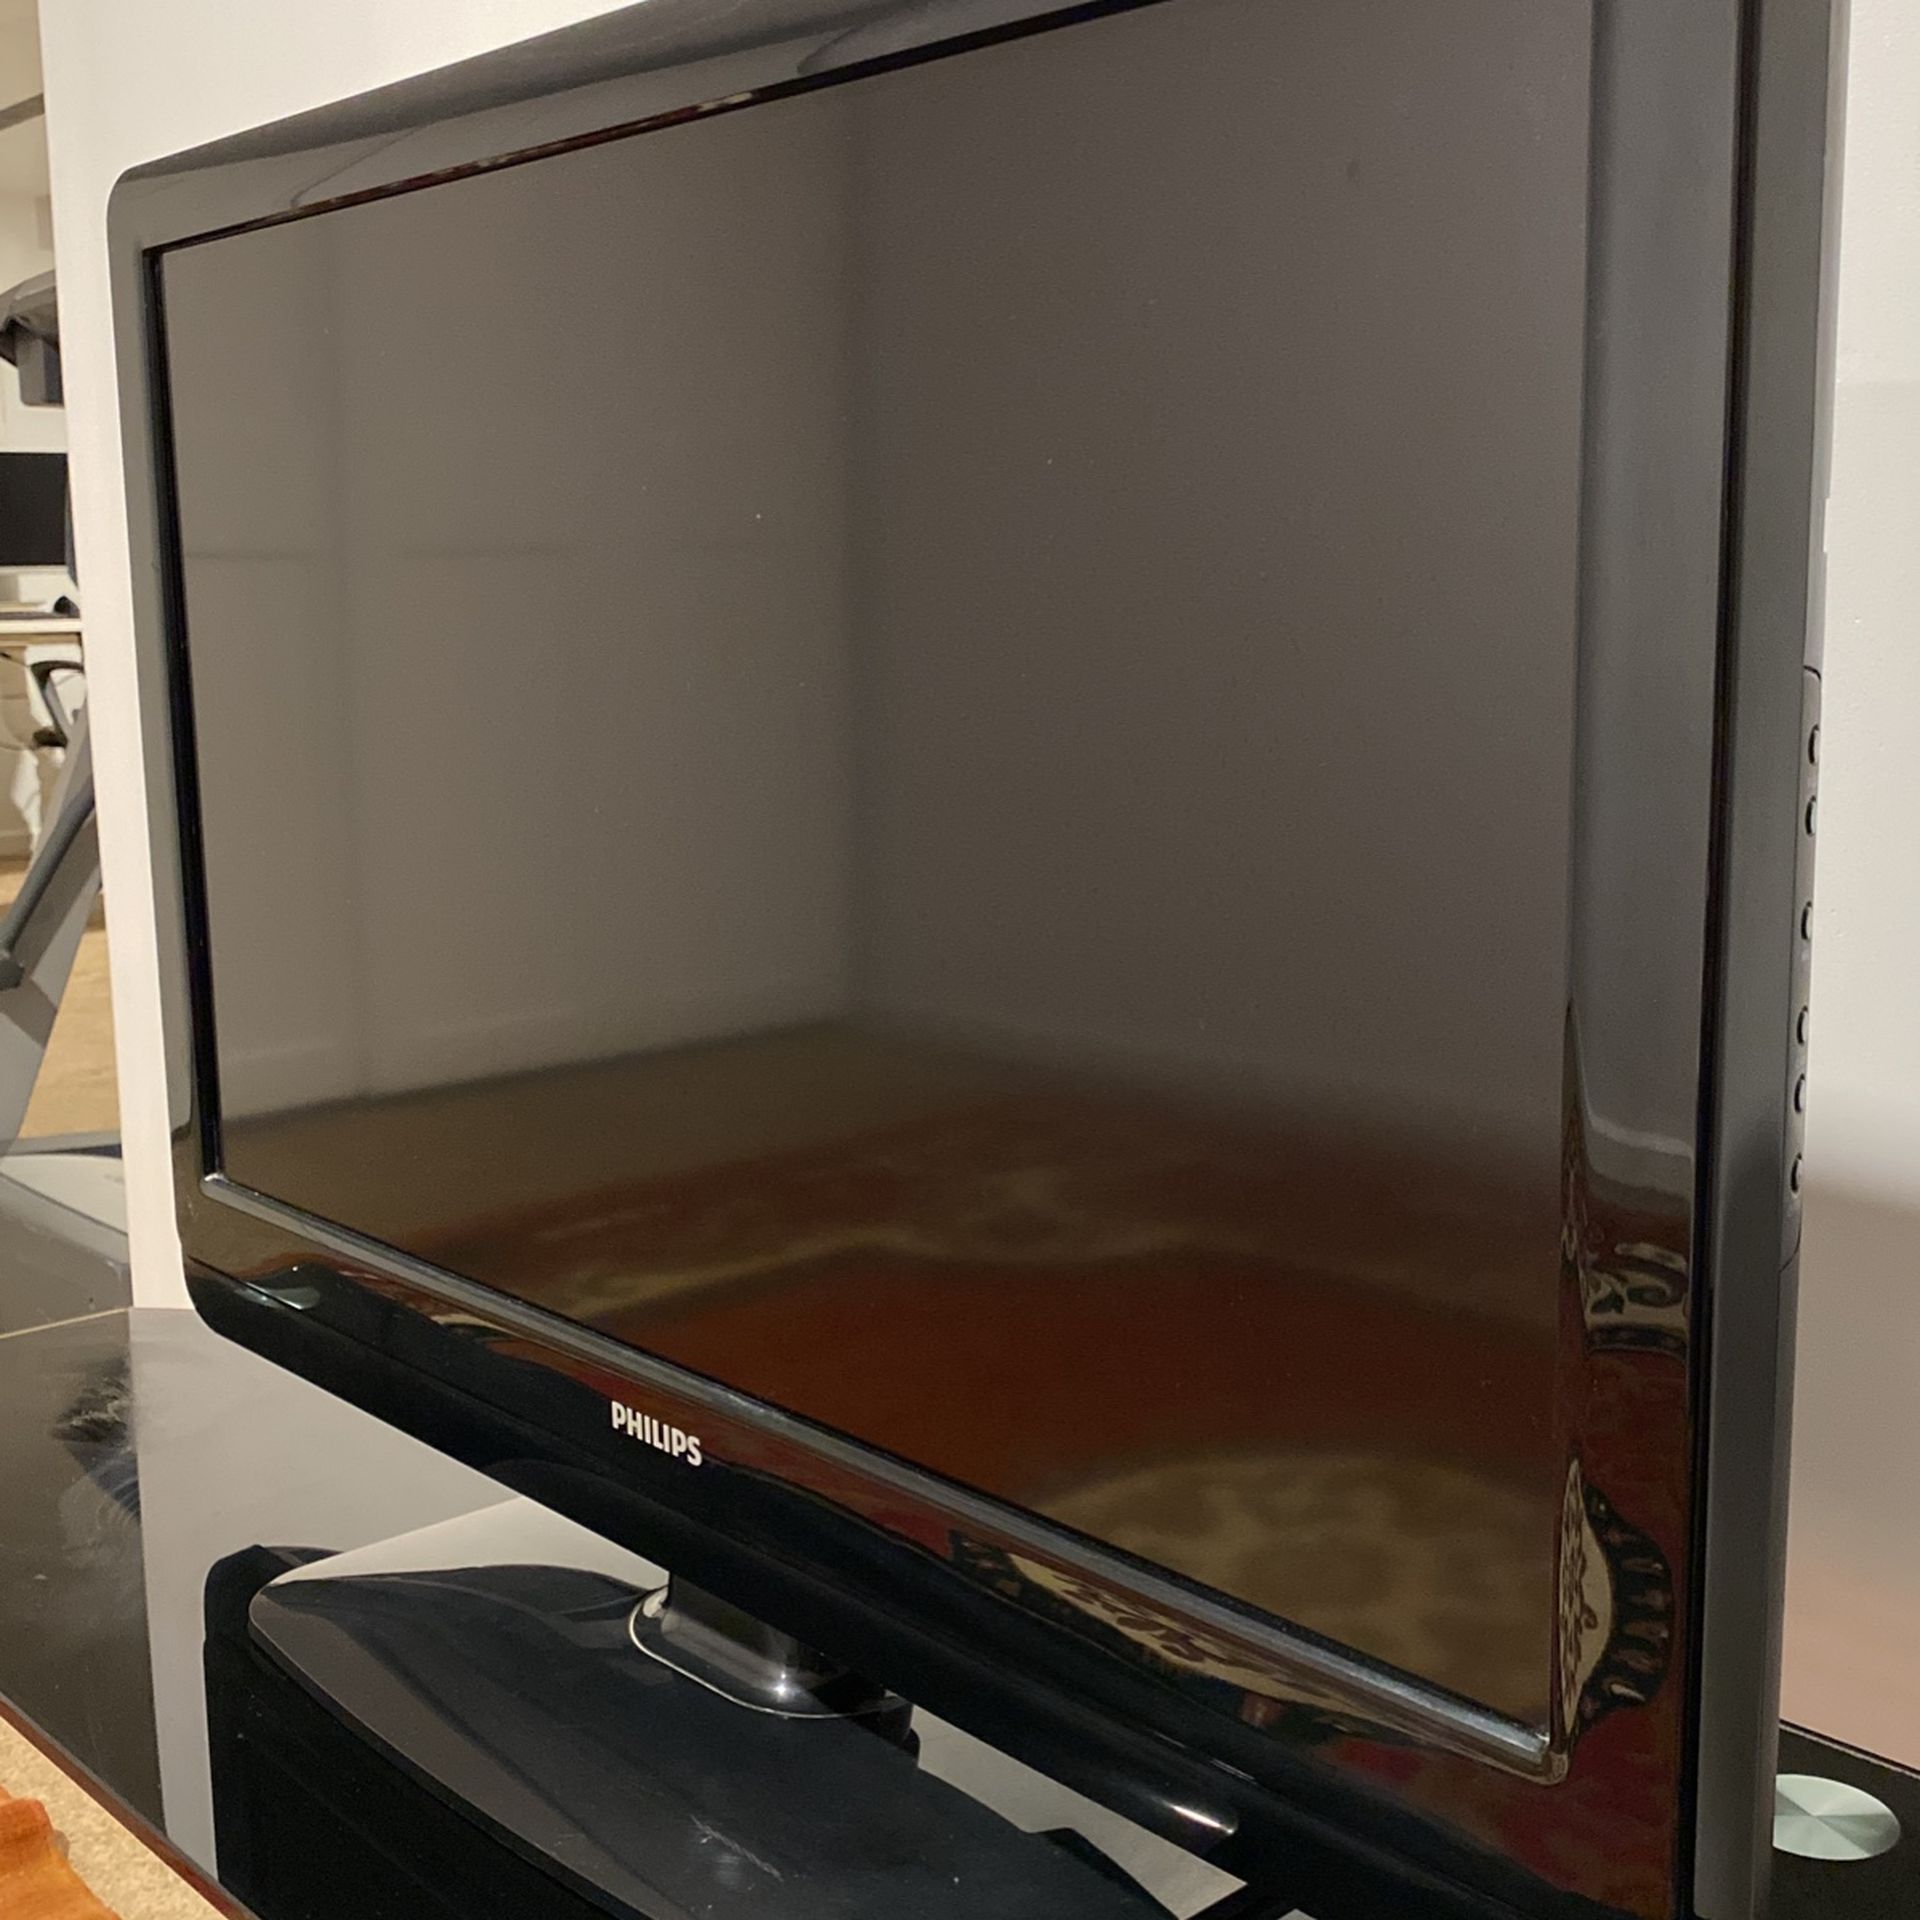 Phillips 32 Inch LCD TV (not a smart tv)